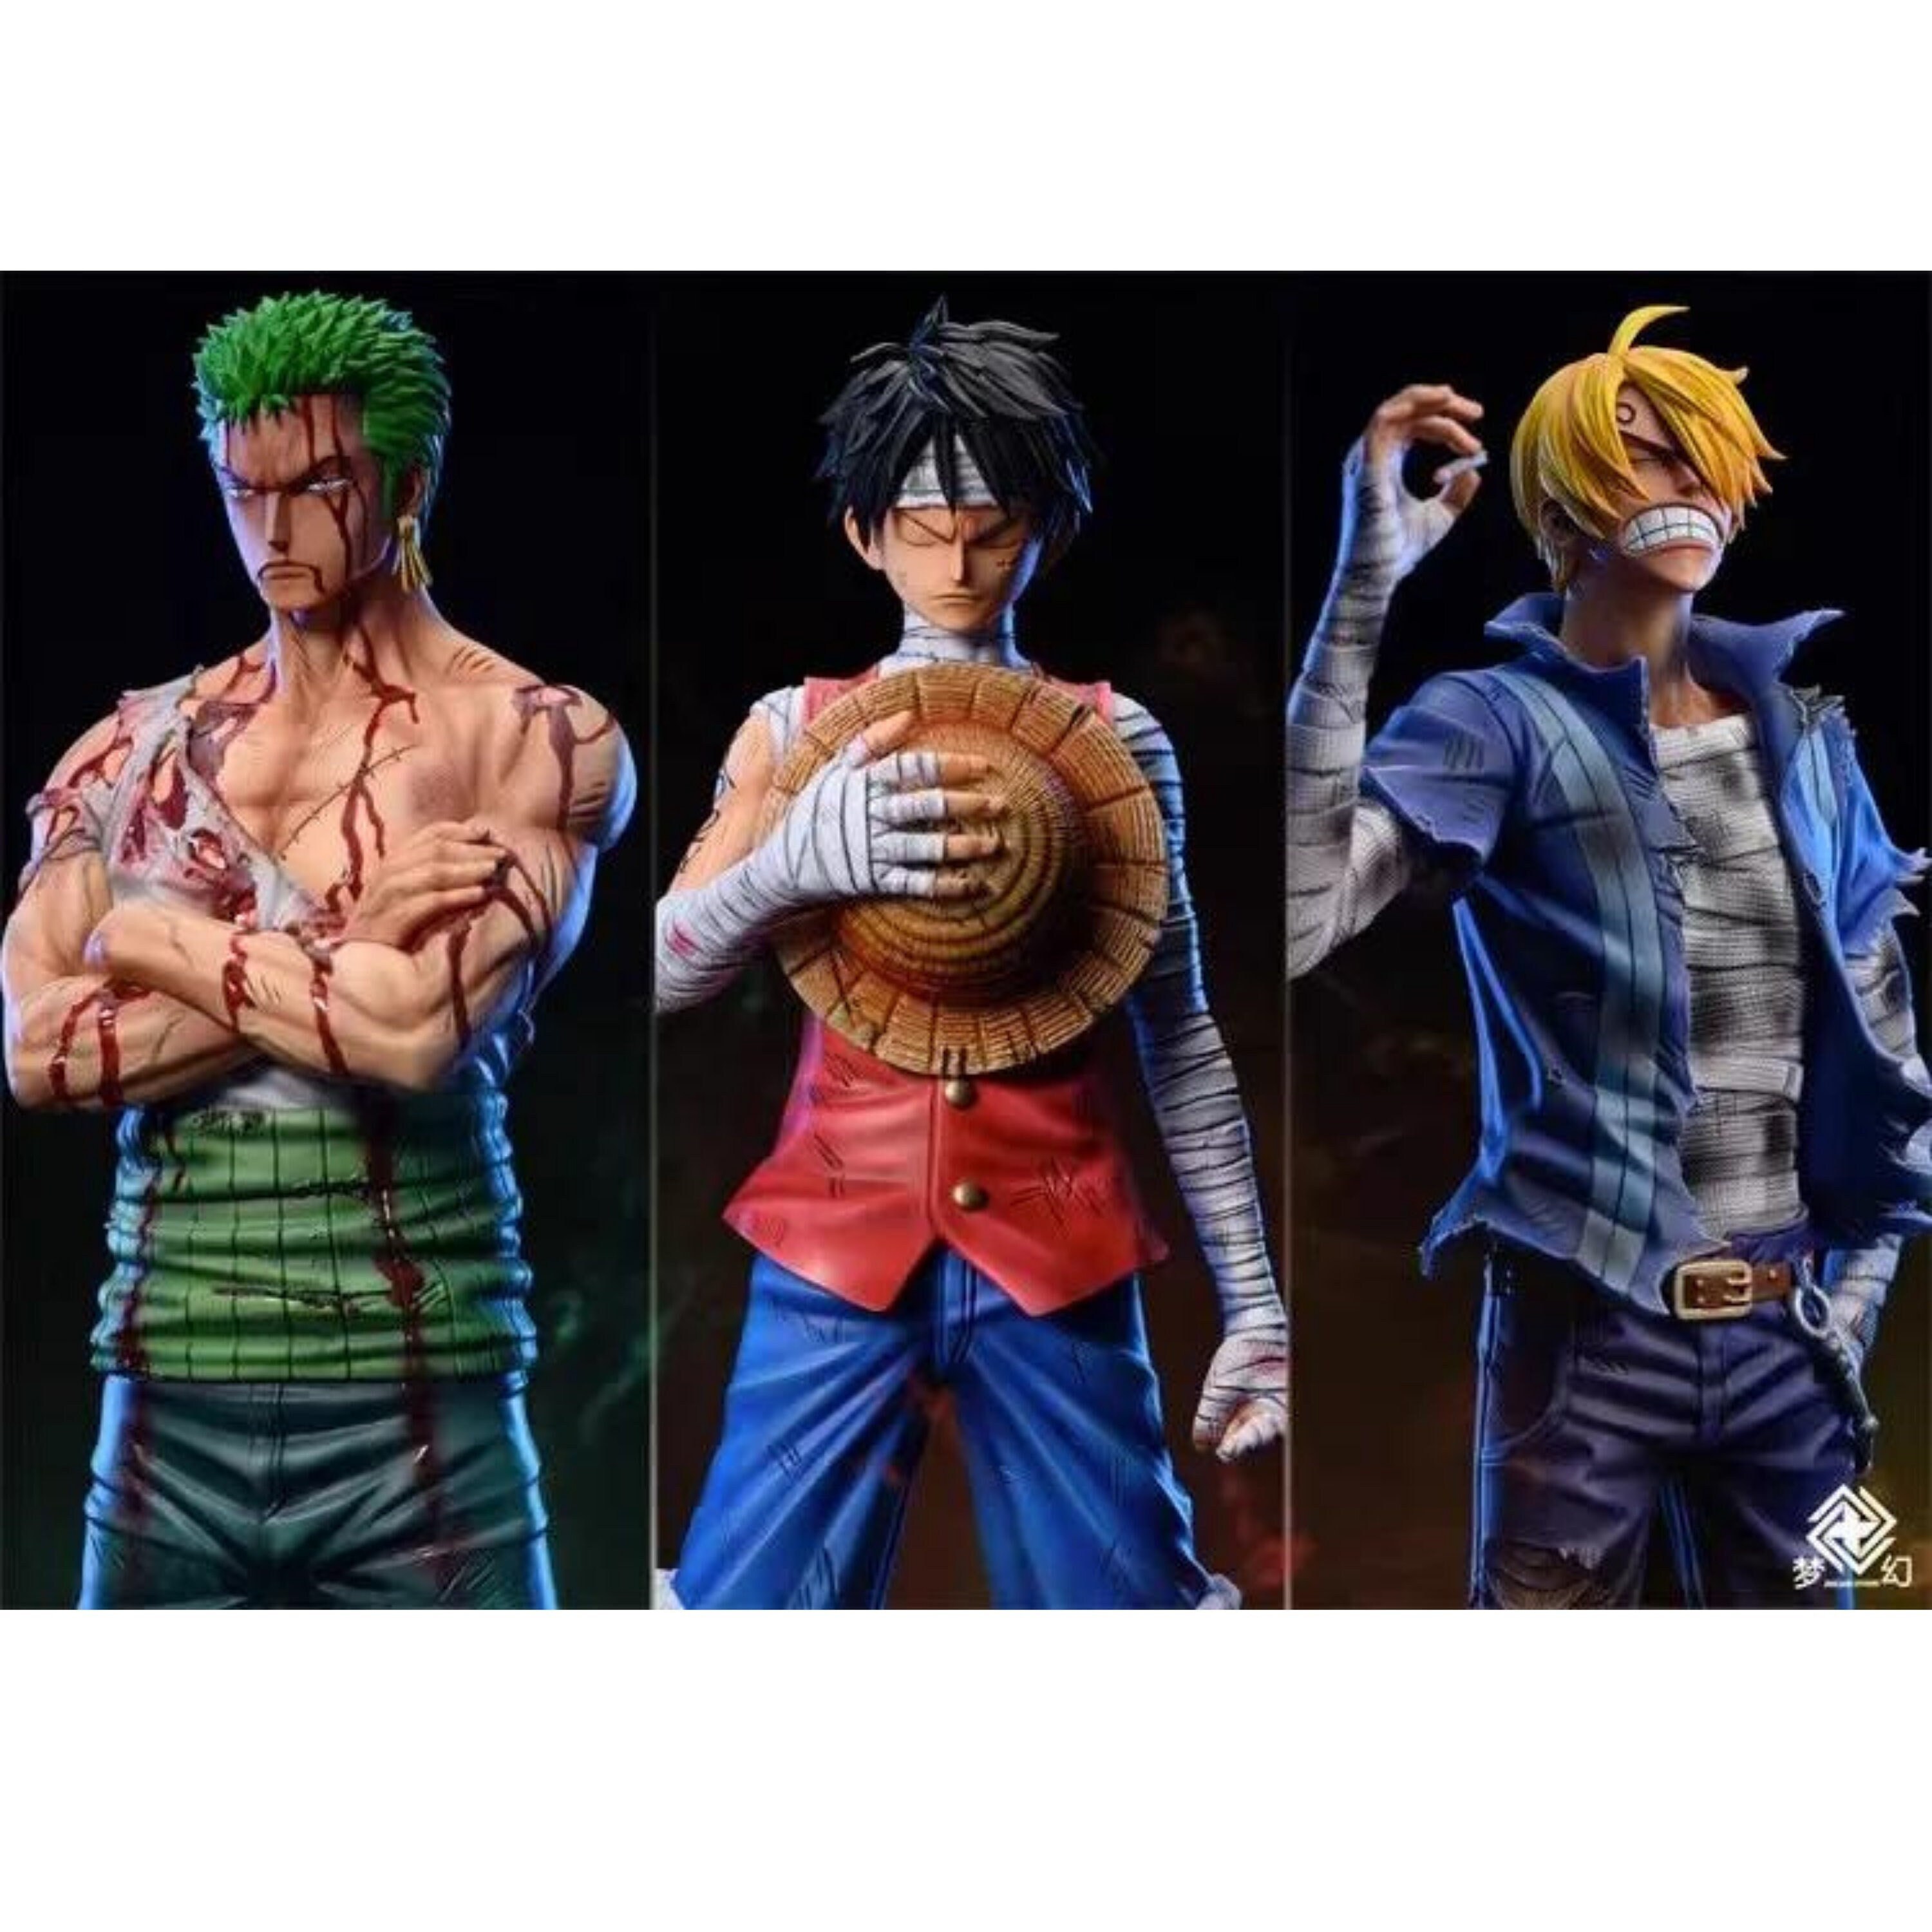 Joinfuny One Piece Sanji Action Figures Series Collection Love Eye